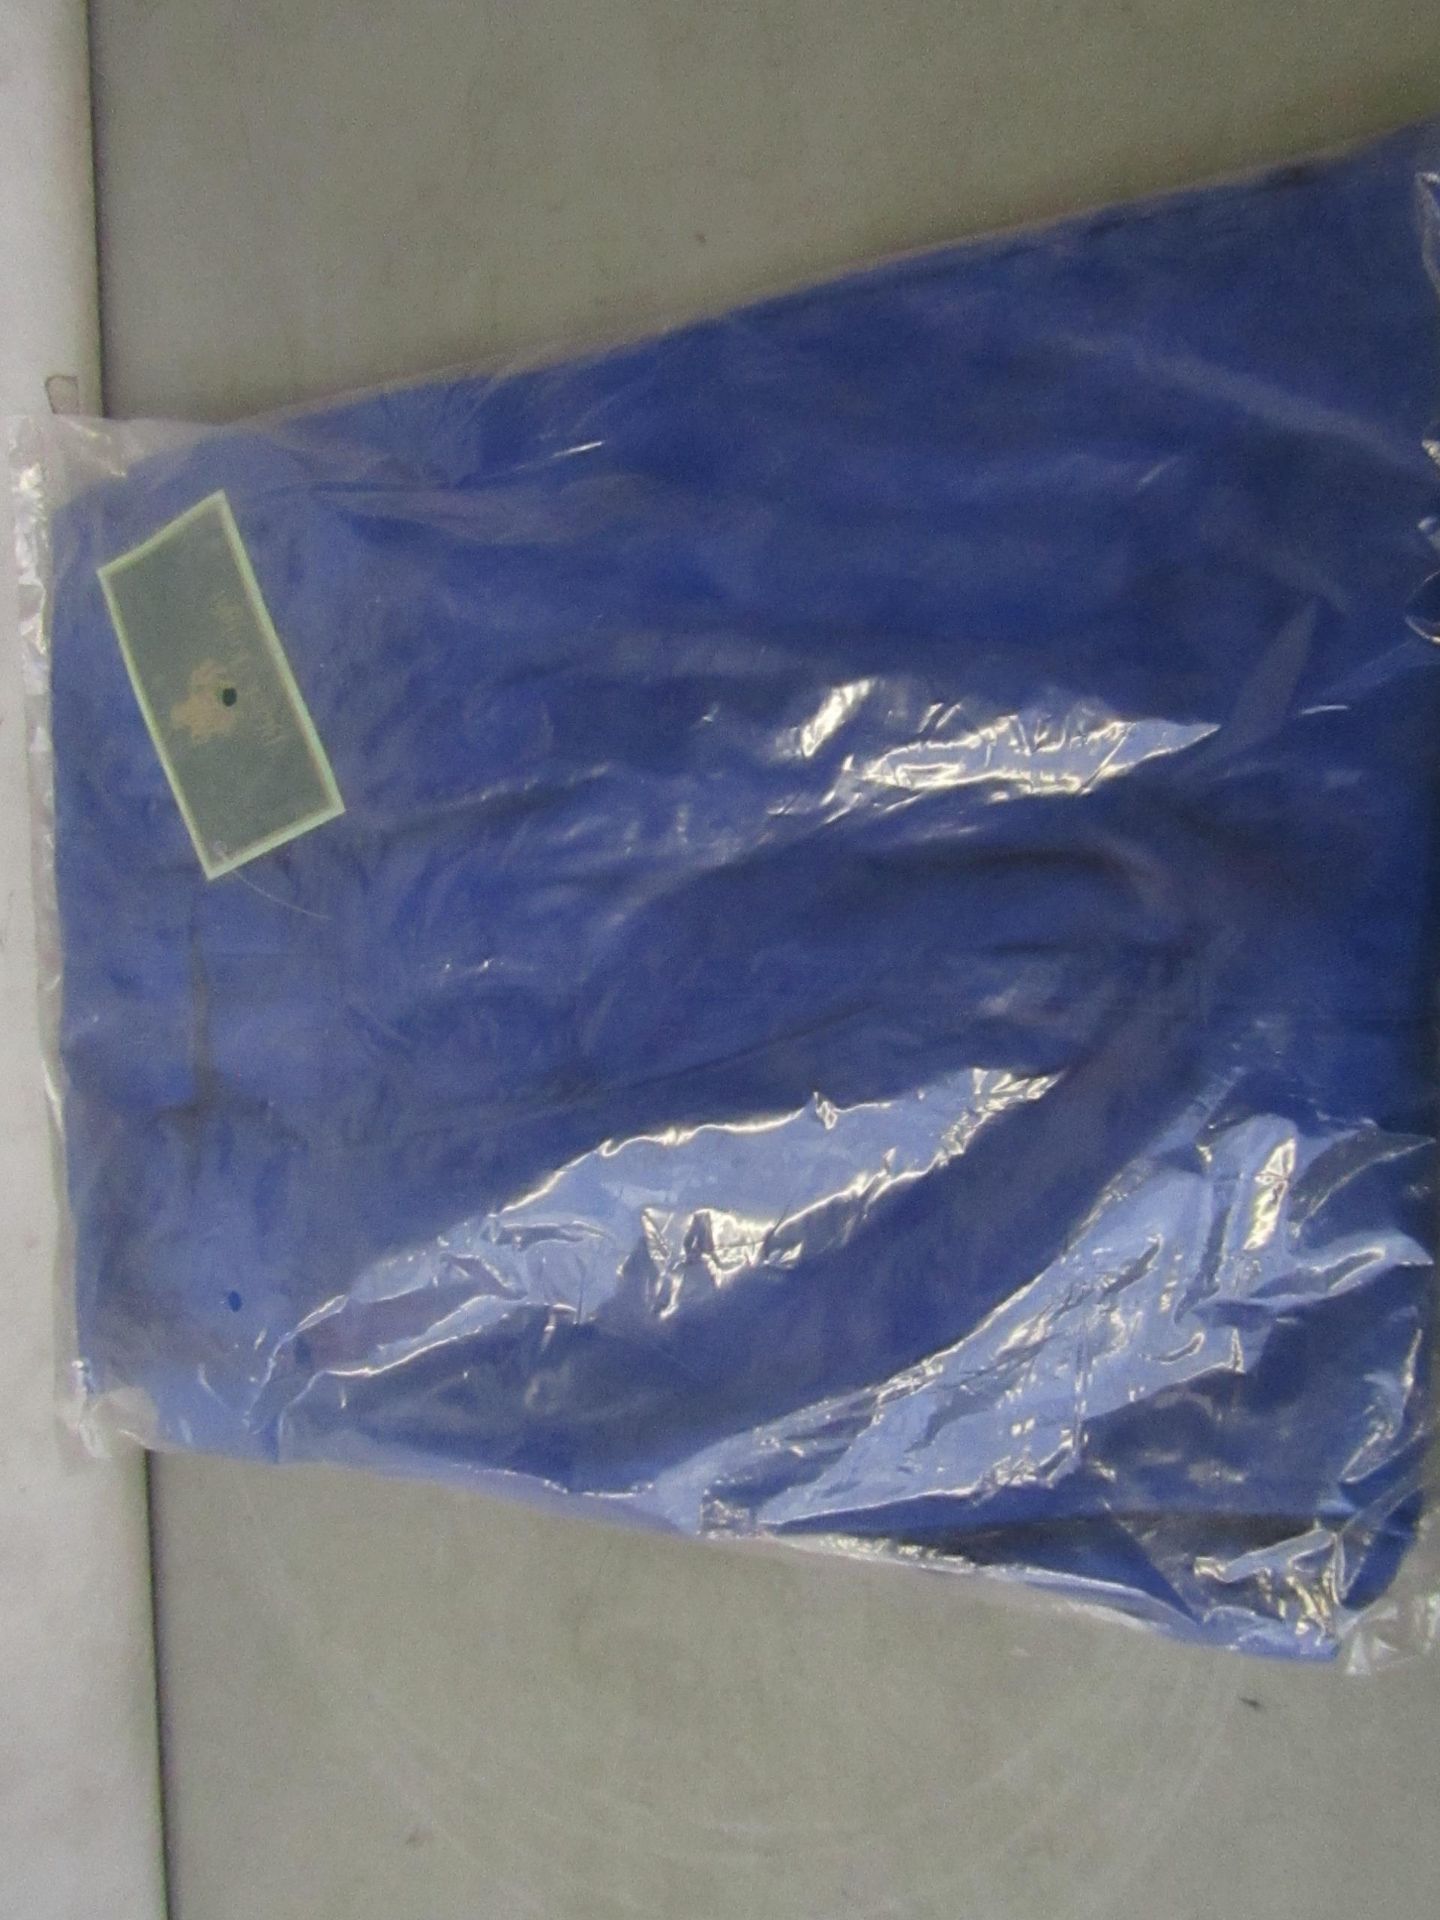 Black Knight - Royal Blue Work Trousers - Size 40 - Unused & Packaged.